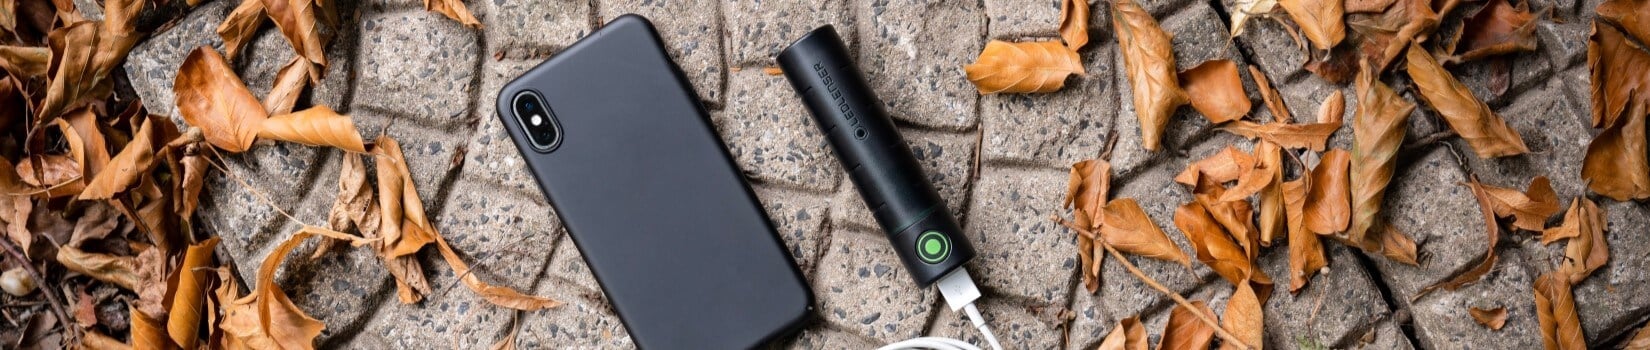 A Smartphone is connected to a power bank